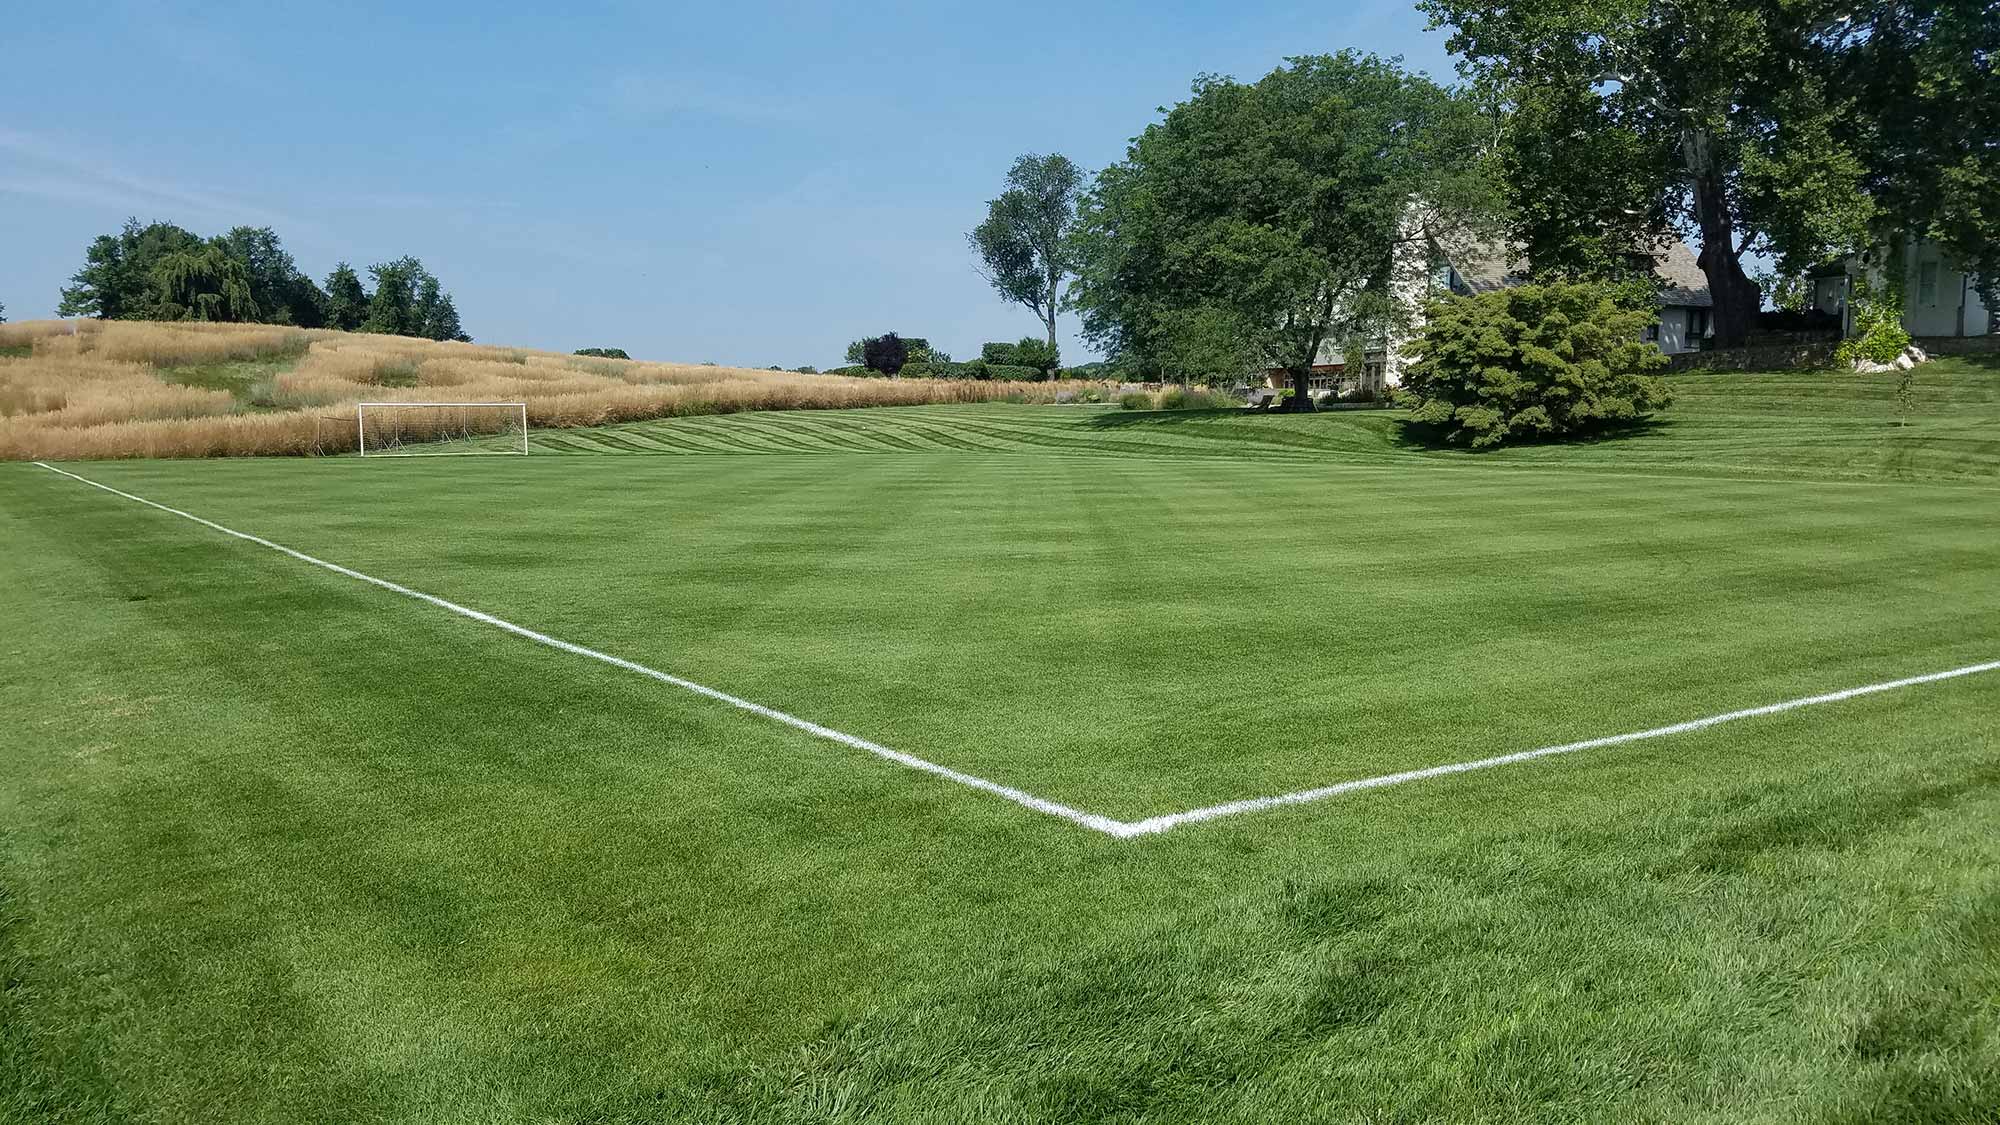 Private Soccer Field Renovation Overview